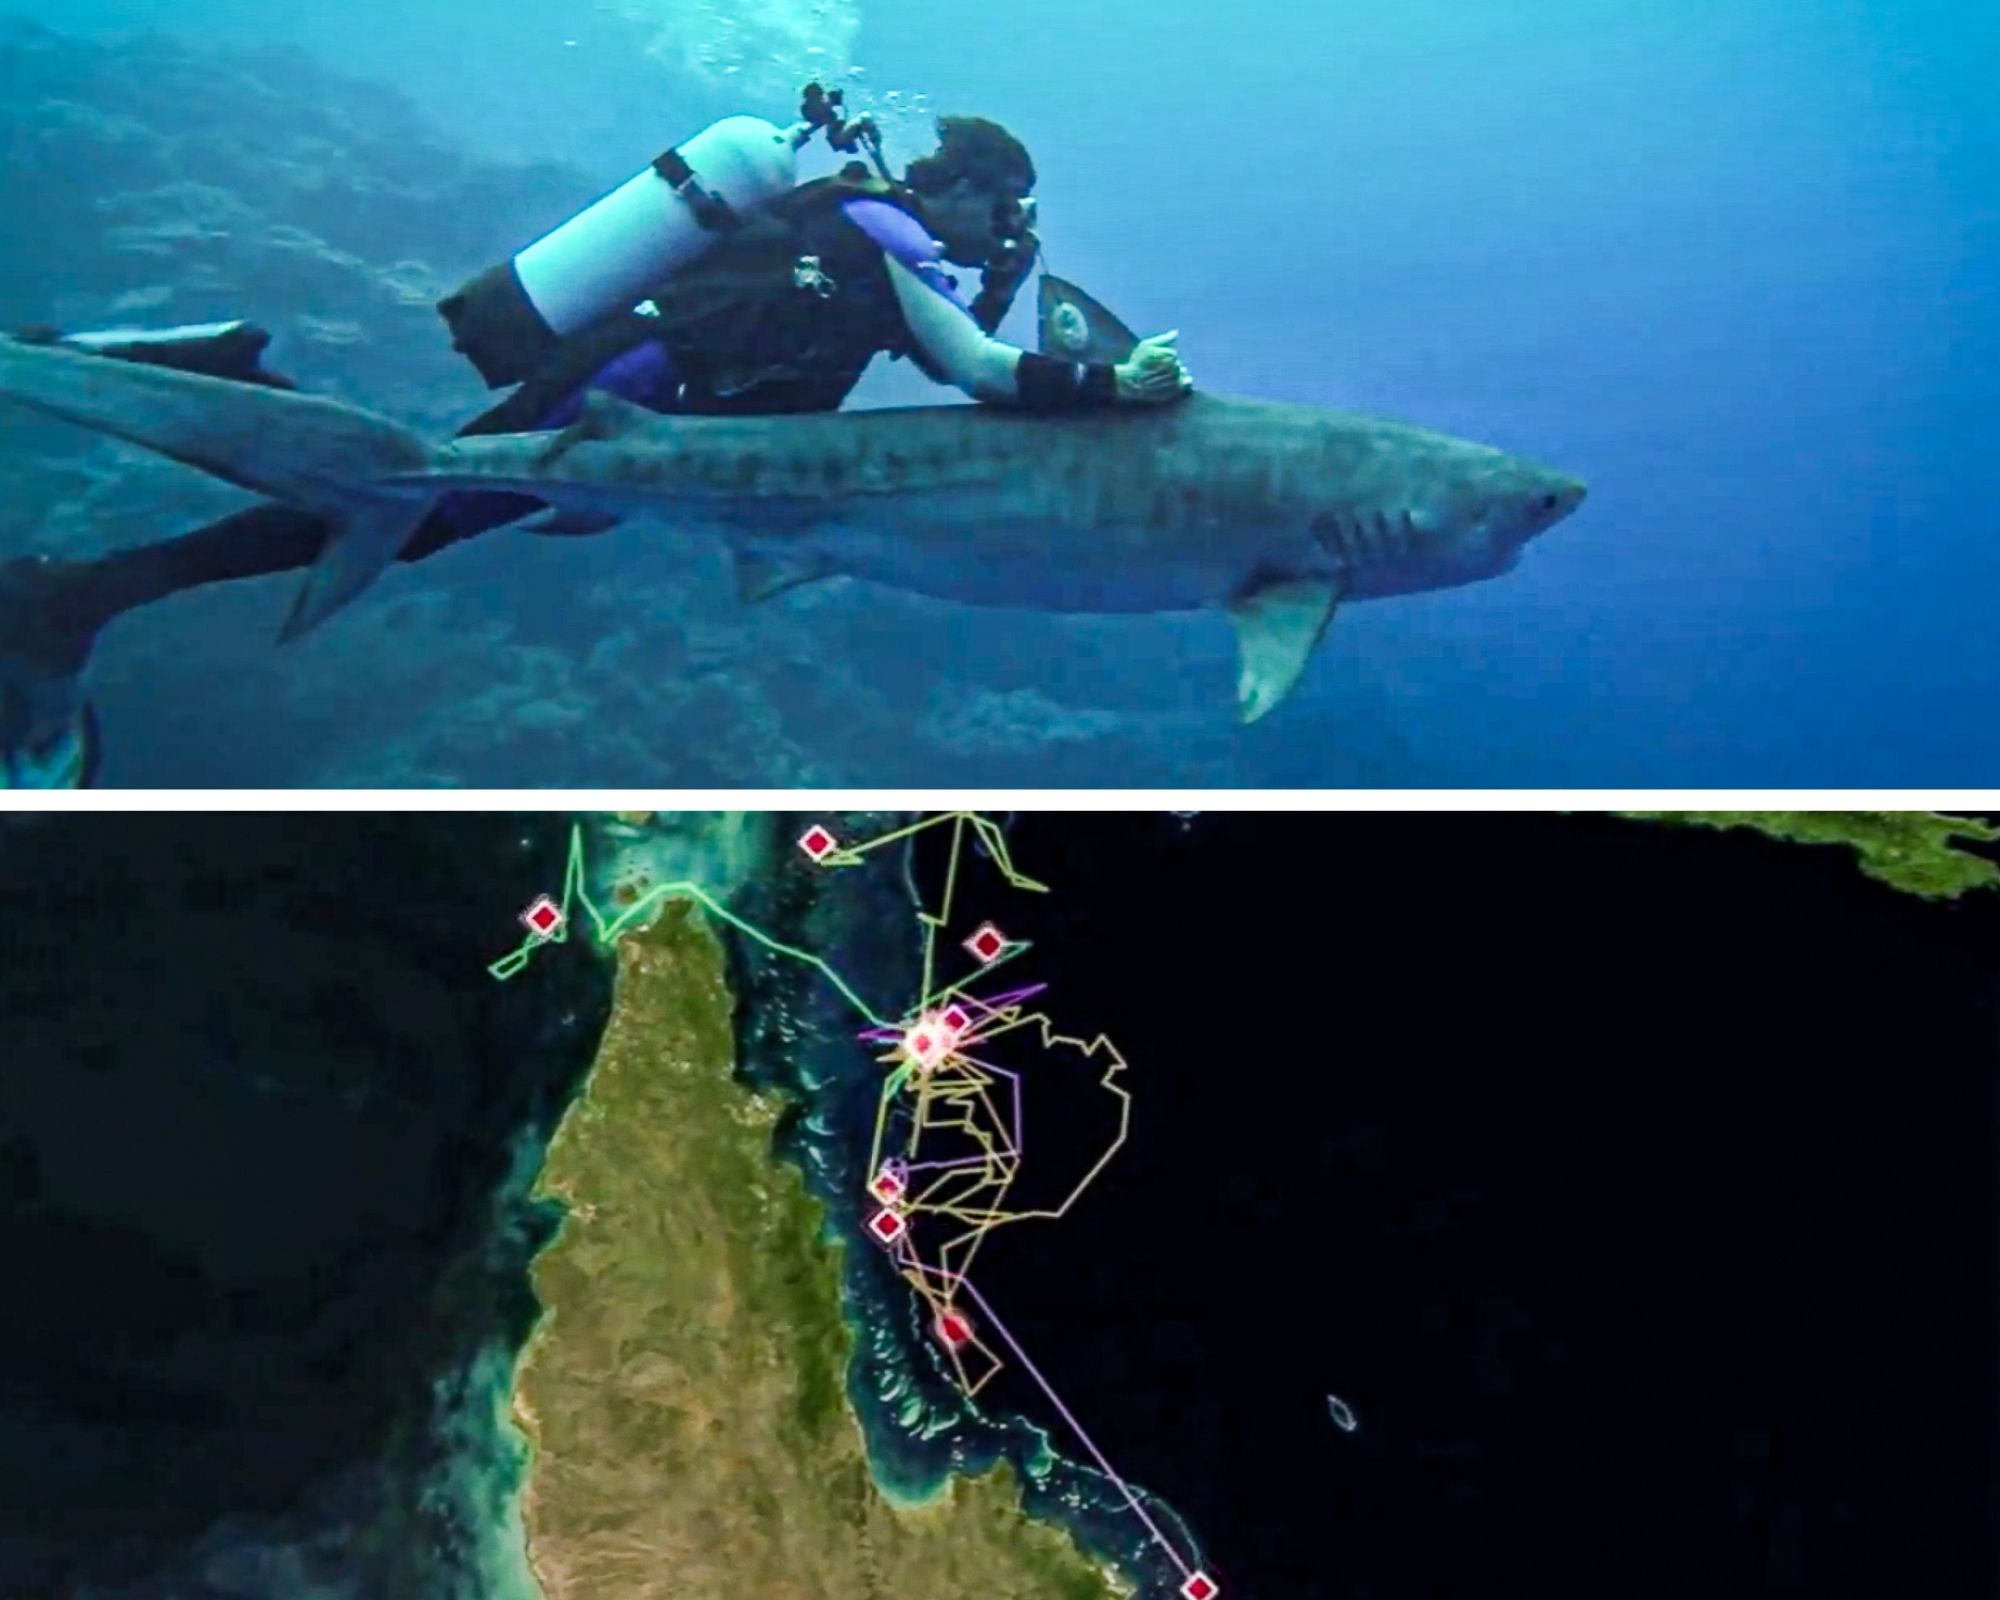 A shark diver swims alongside a freshly tagged, relaxed tiger shark by holding onto its dorsal fin. The accompanying map of Far North Queensland shows how far that tiger shark traveled over the next few months.